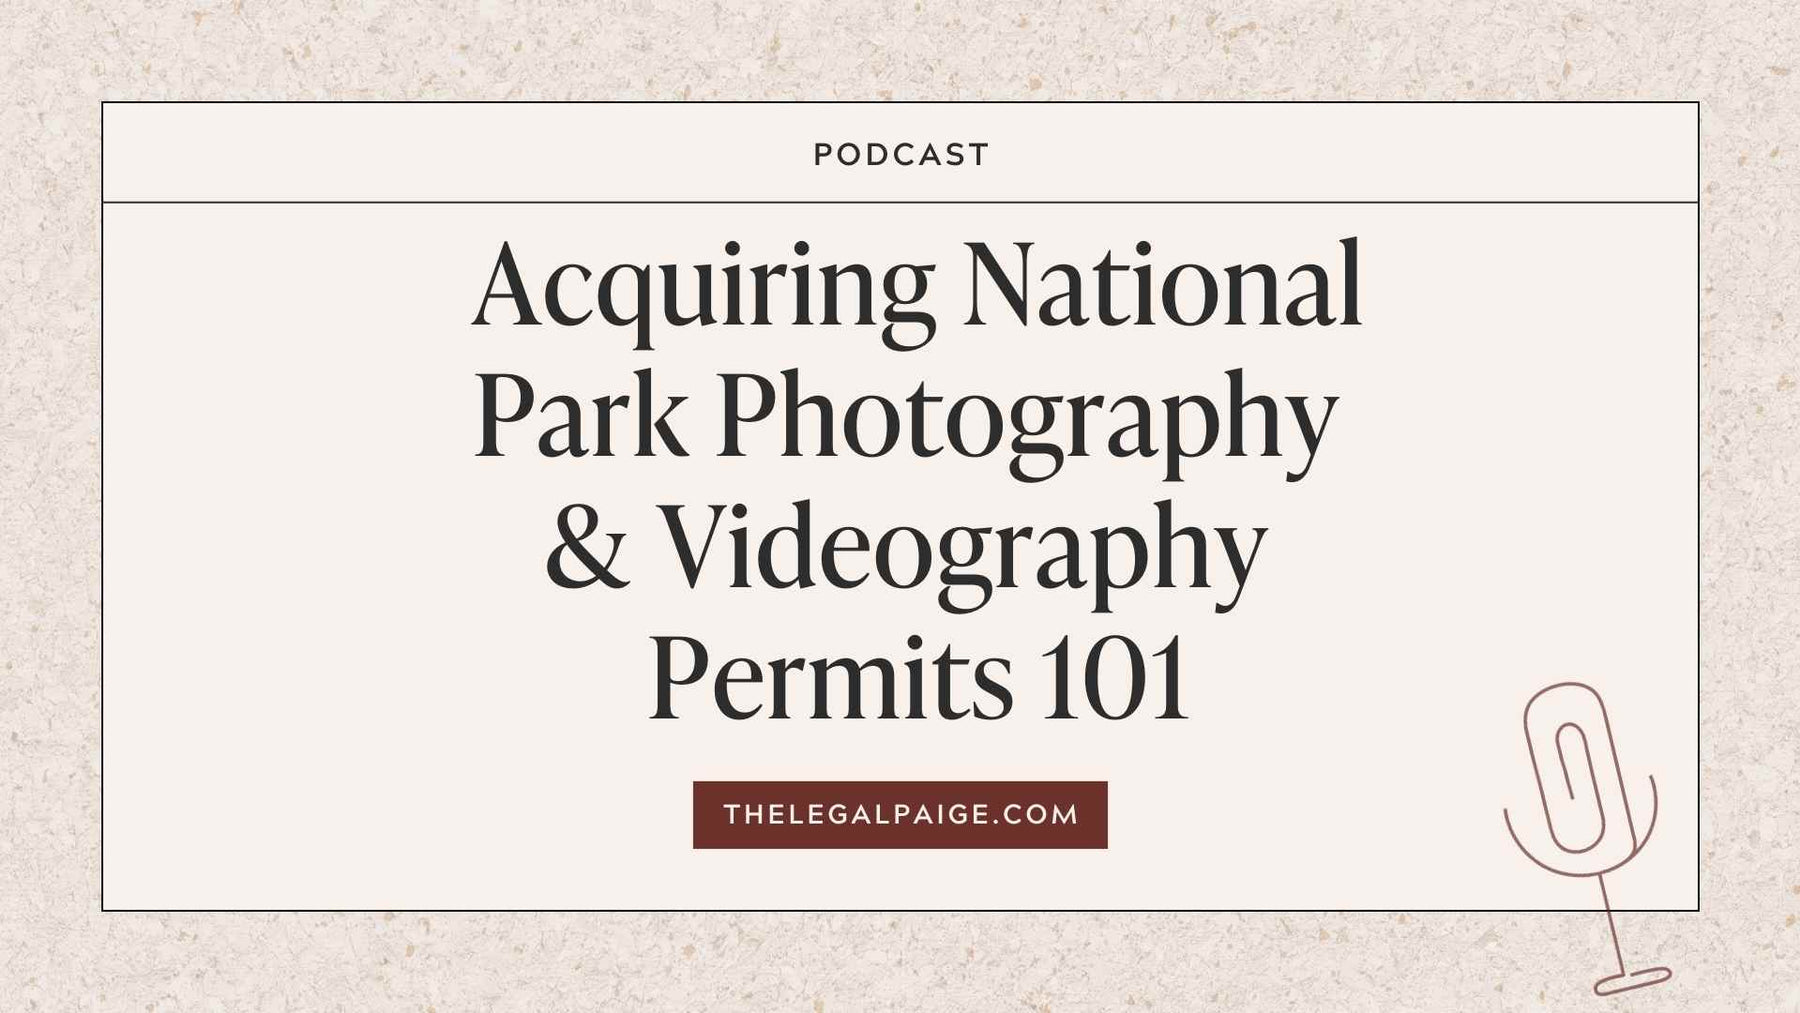 Episode 68: Acquiring National Park Photography & Videography Permits 101